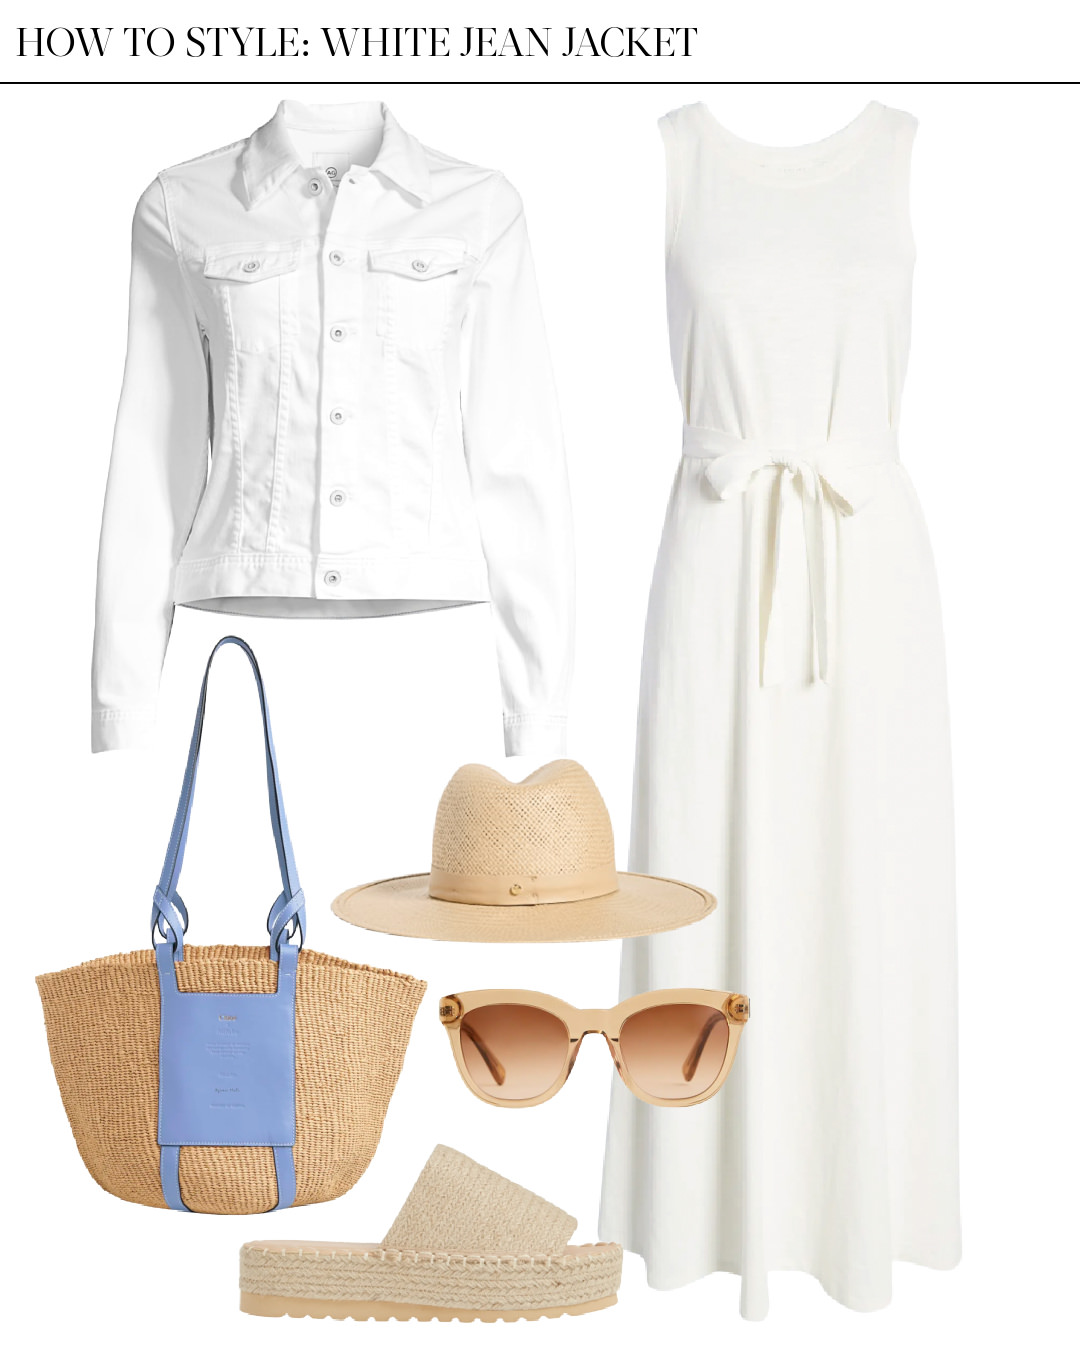 white jean jacket outfit idea with white maxi dress